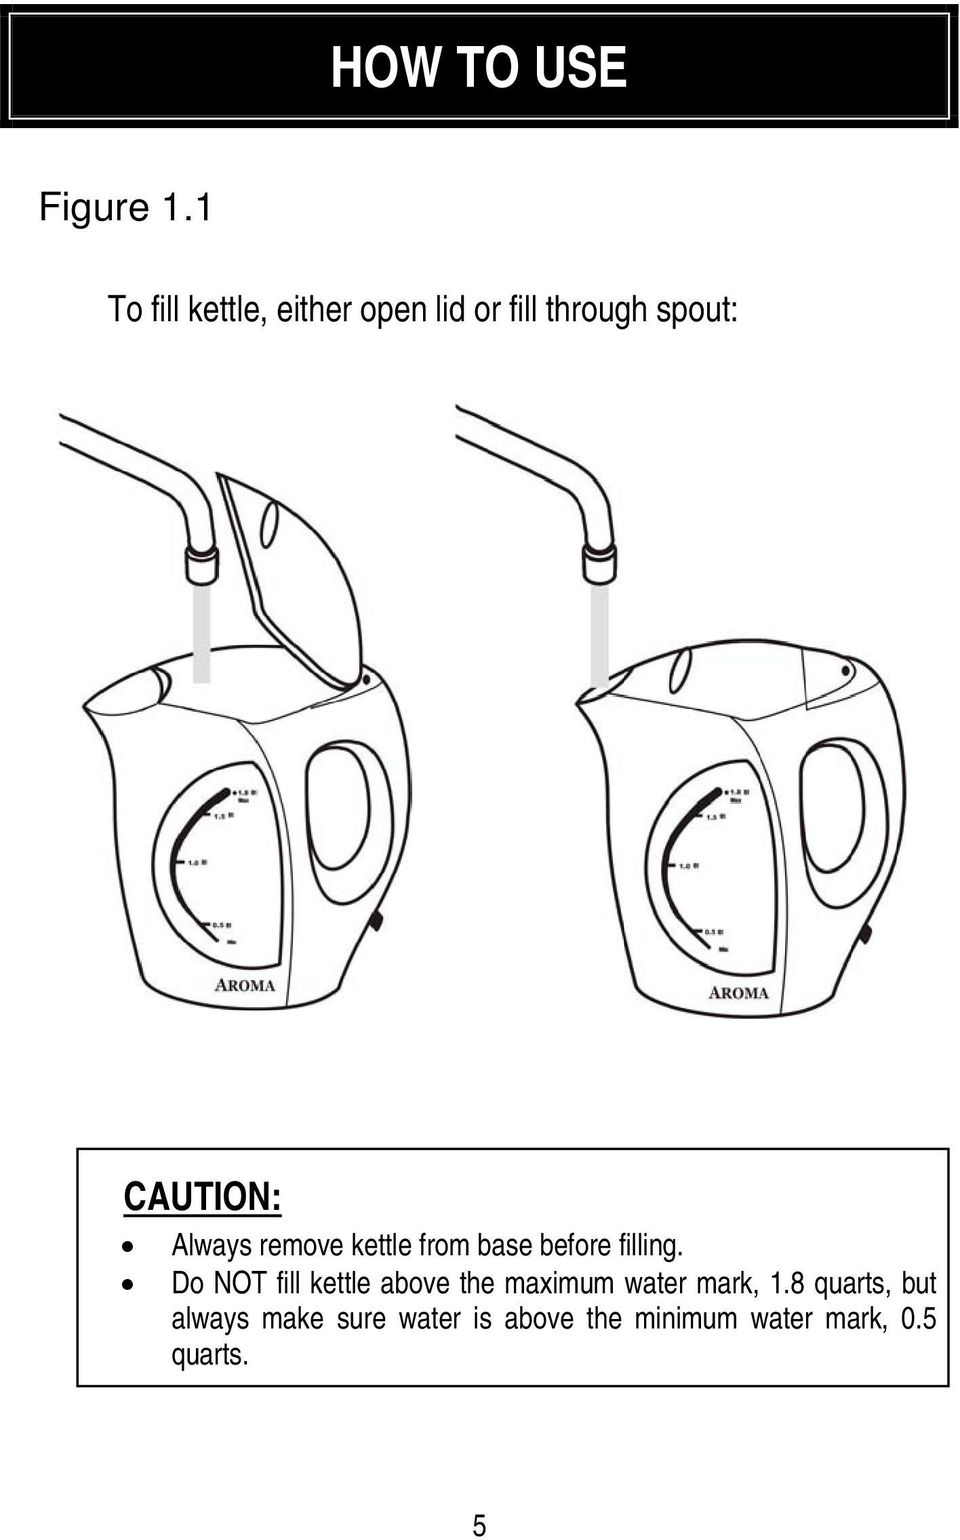 Always remove kettle from base before filling.